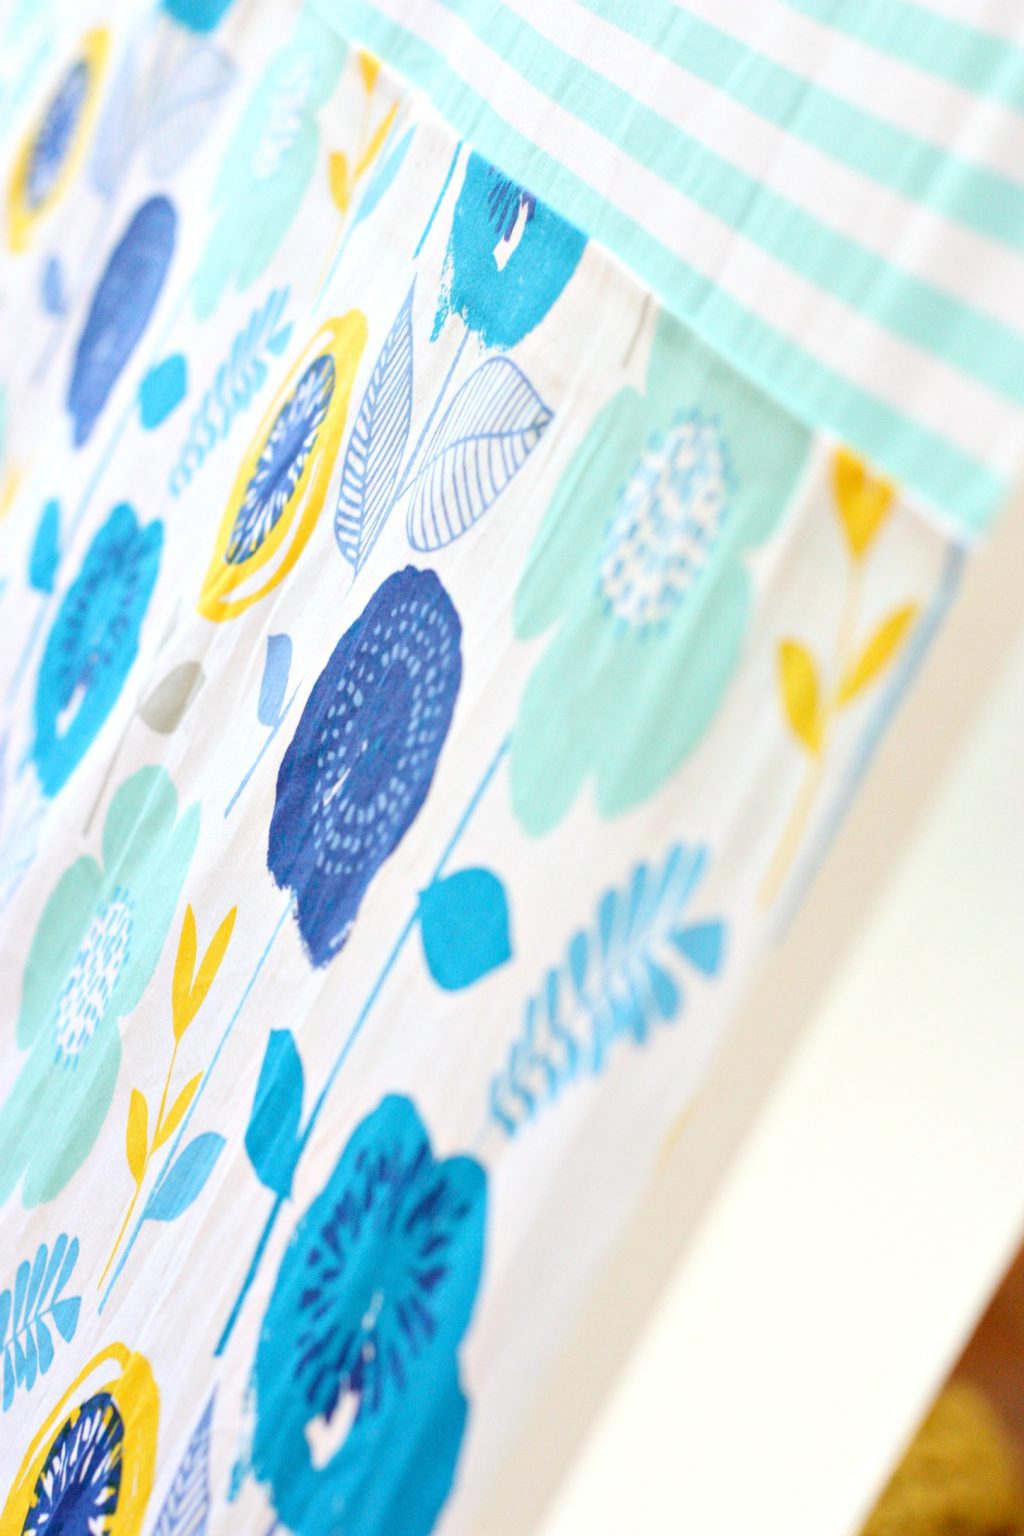 DIY Kids Play Tent Tutorial featured by top US craft blog, The Pretty Life Girls